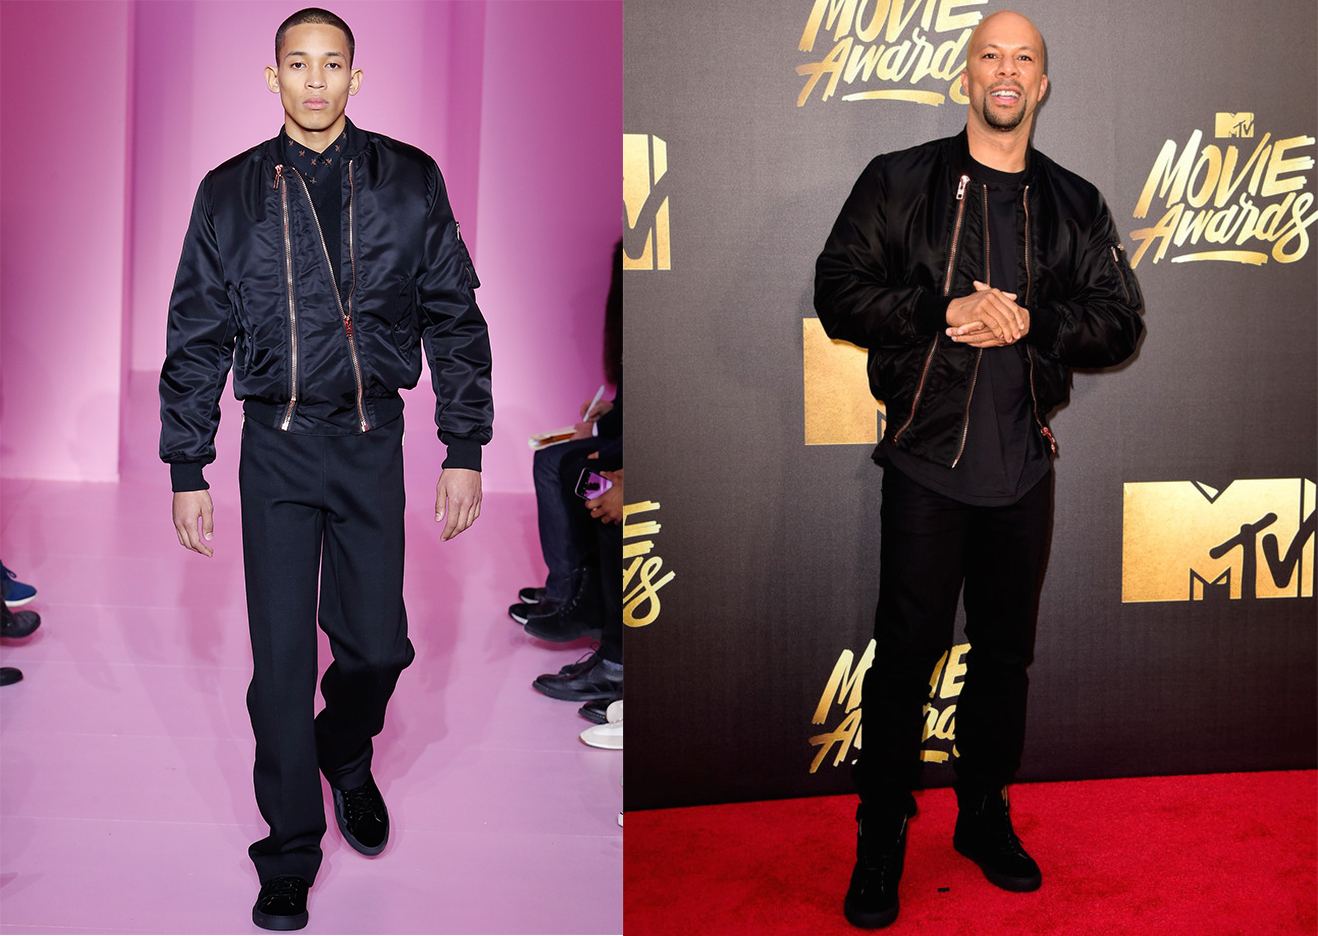 Spotted: Common In Givenchy AW16 at the MTV Movie Awards